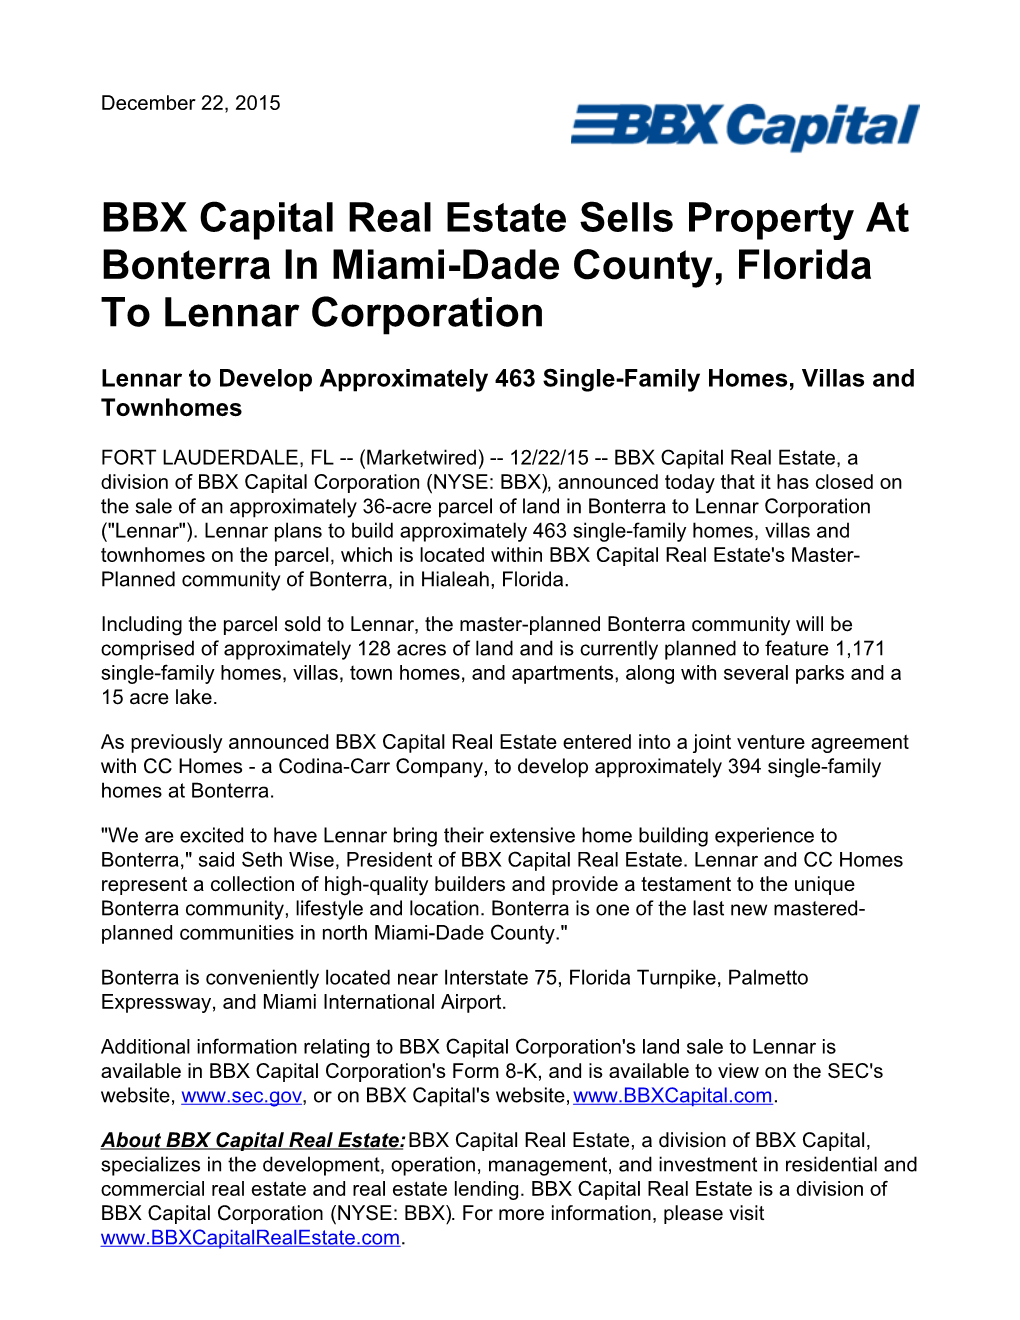 BBX Capital Real Estate Sells Property at Bonterra in Miami-Dade County, Florida to Lennar Corporation